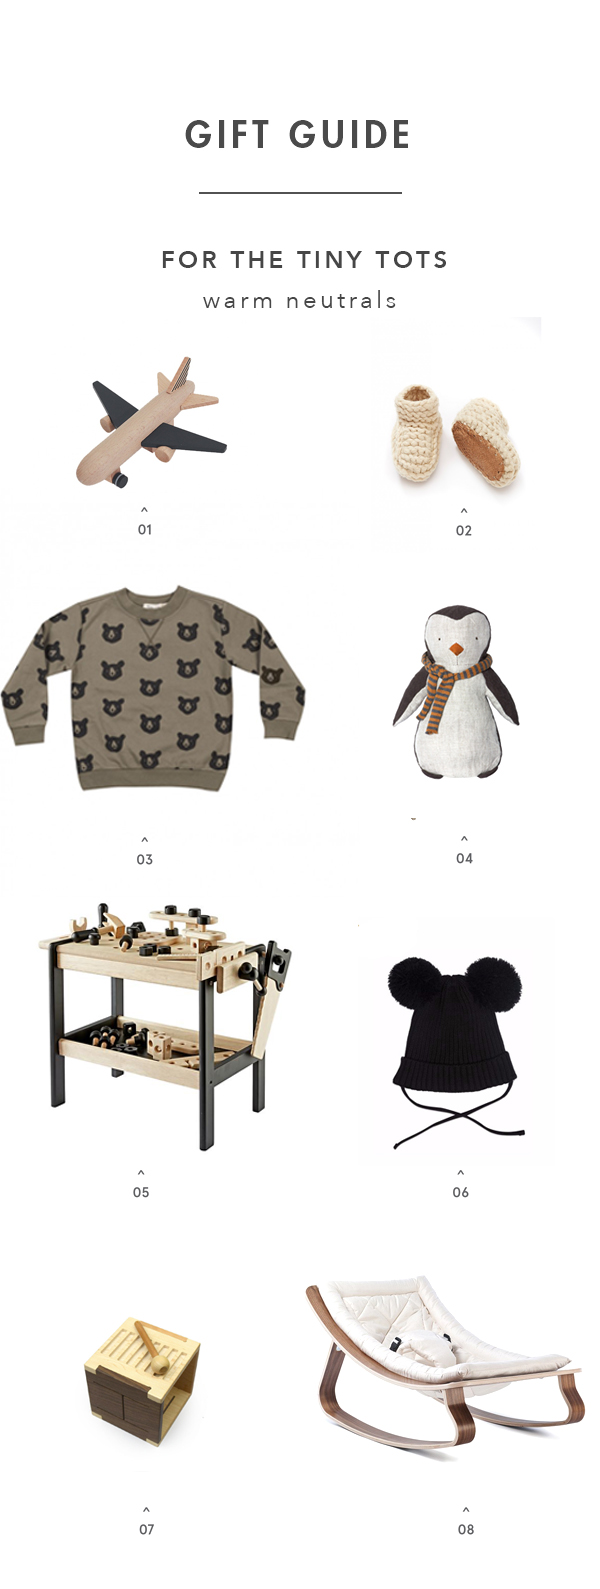 apt34_baby_gift_guide